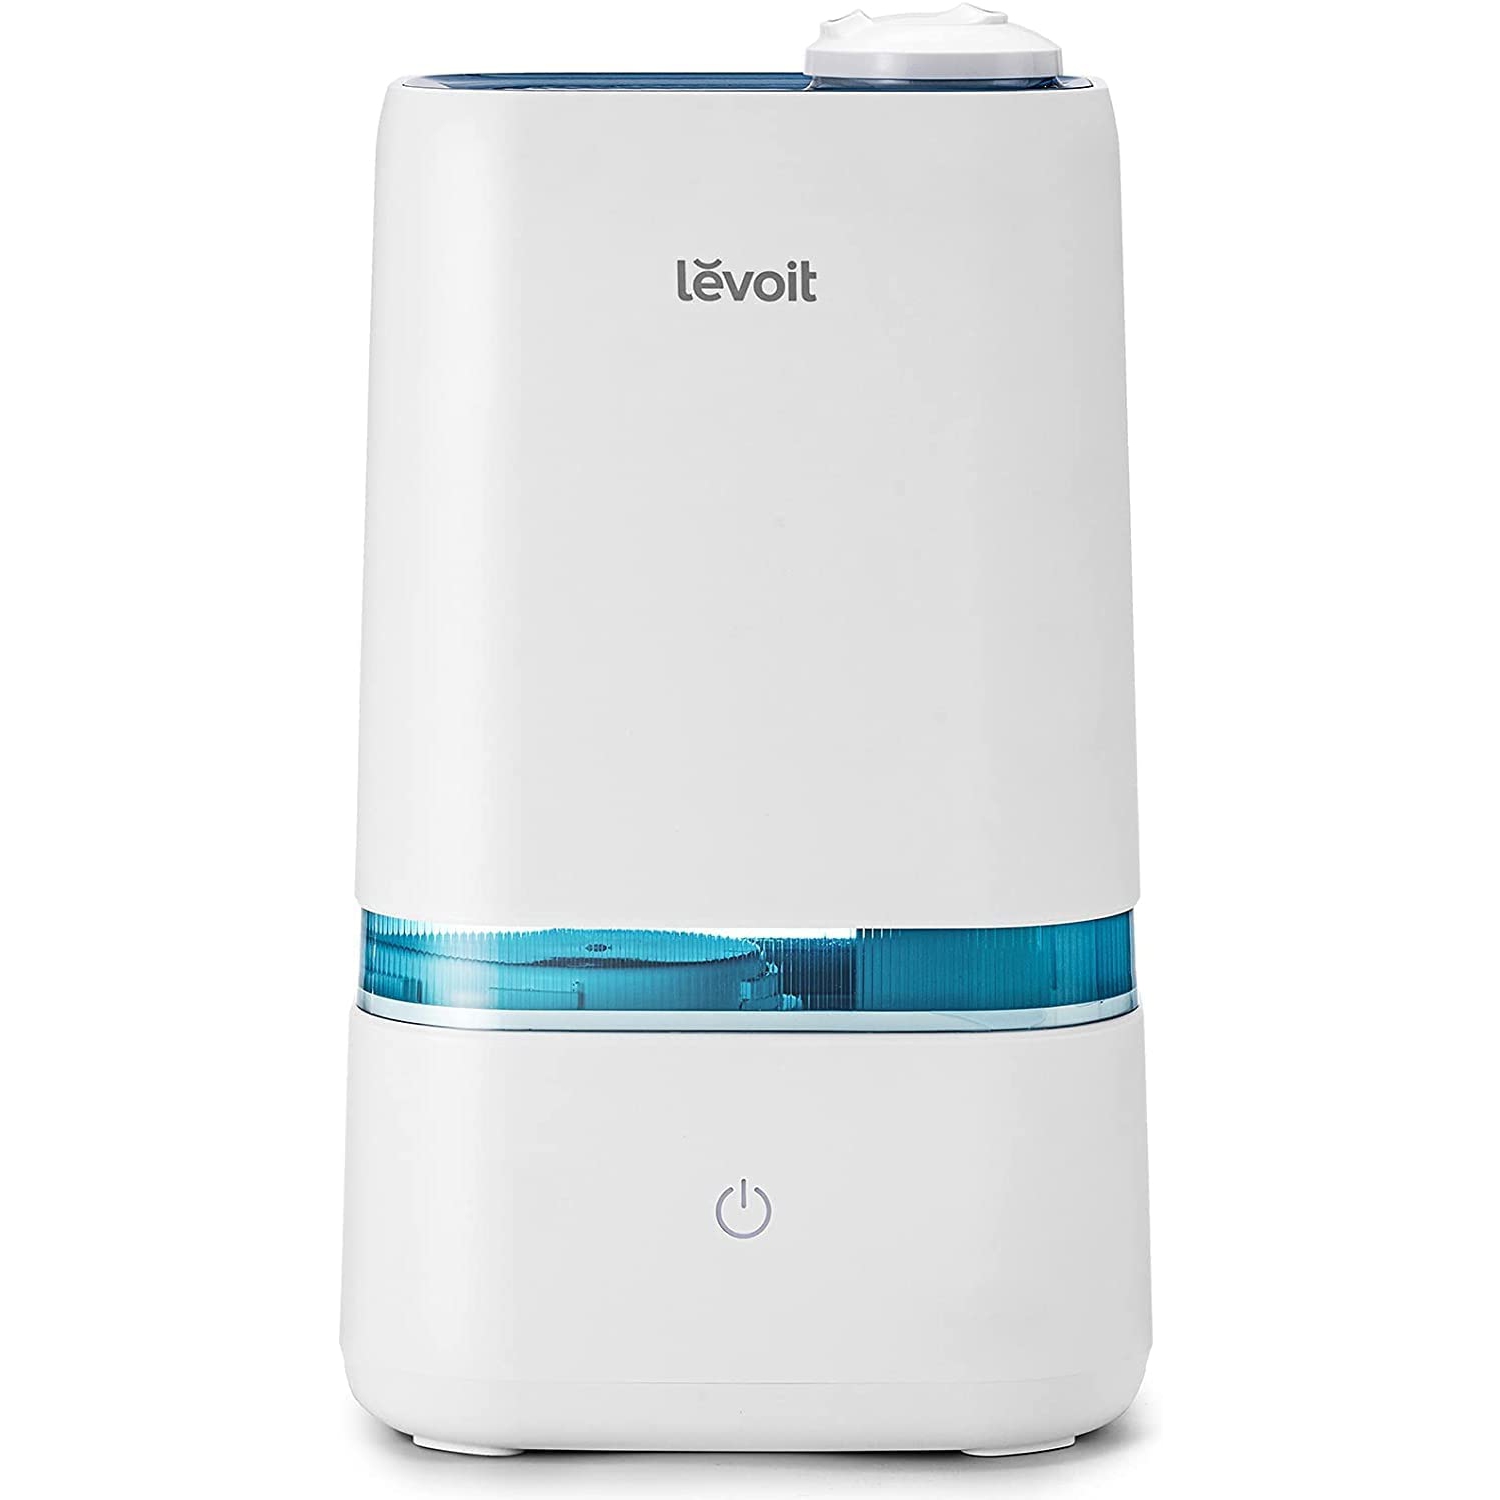 LEVOIT Humidifier for Bedroom, 4L Cool Mist Humidifiers for Plants, Baby Nursery with Essential Oil Tray, Quiet Operation, BPA Free, Last Up to 40h, White